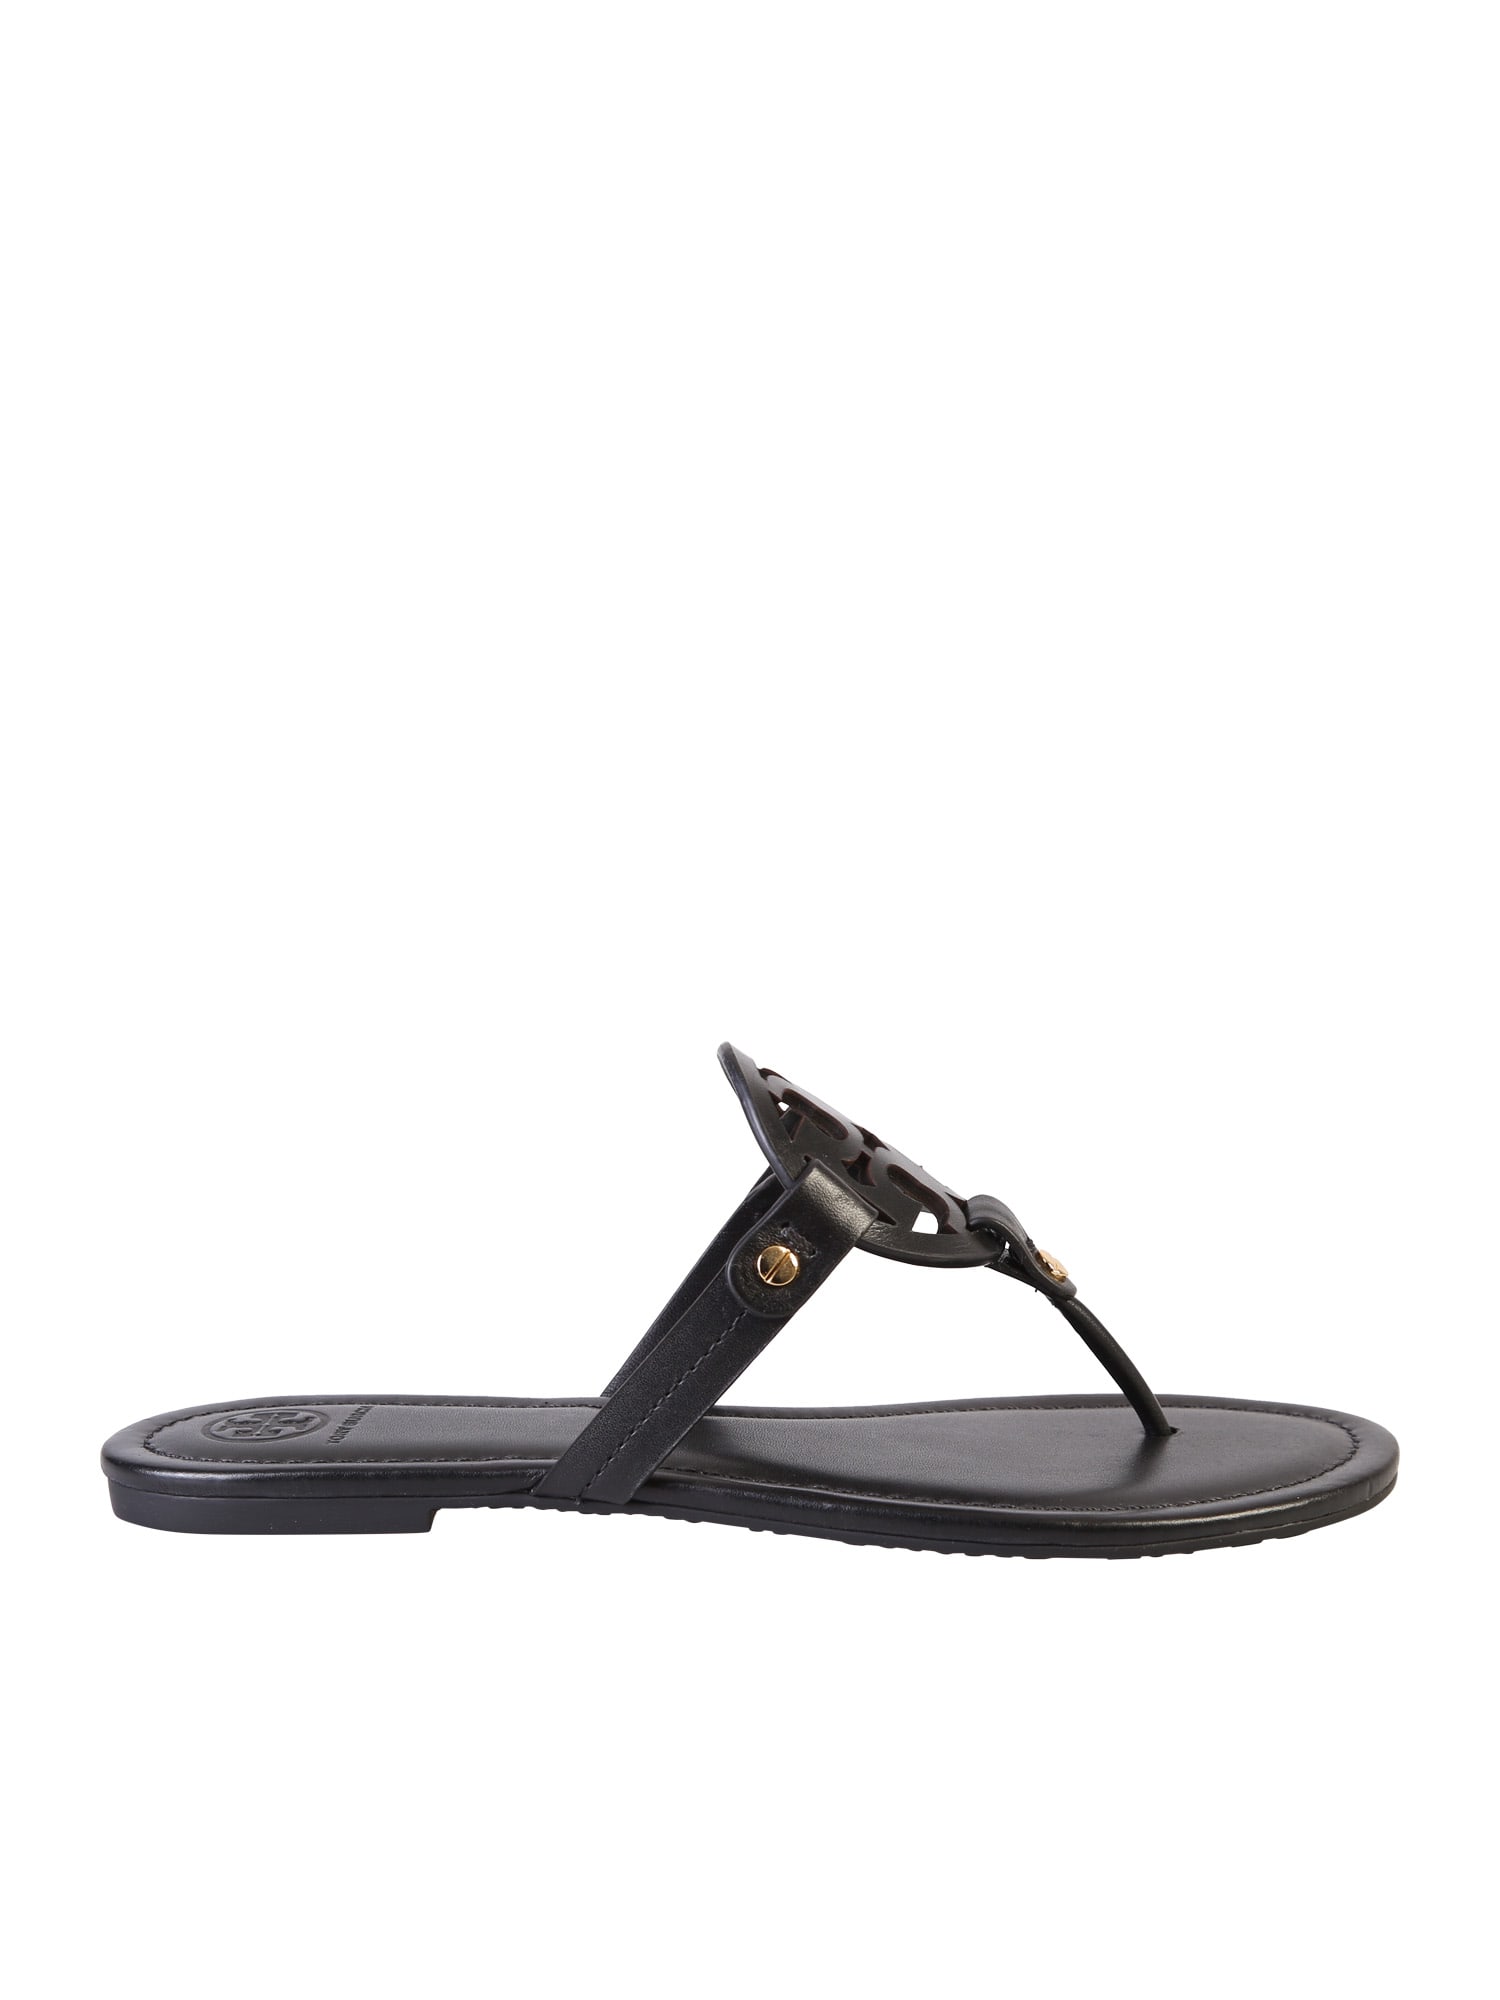 Buy Tory Burch Black Miller Sandals online, shop Tory Burch shoes with free shipping